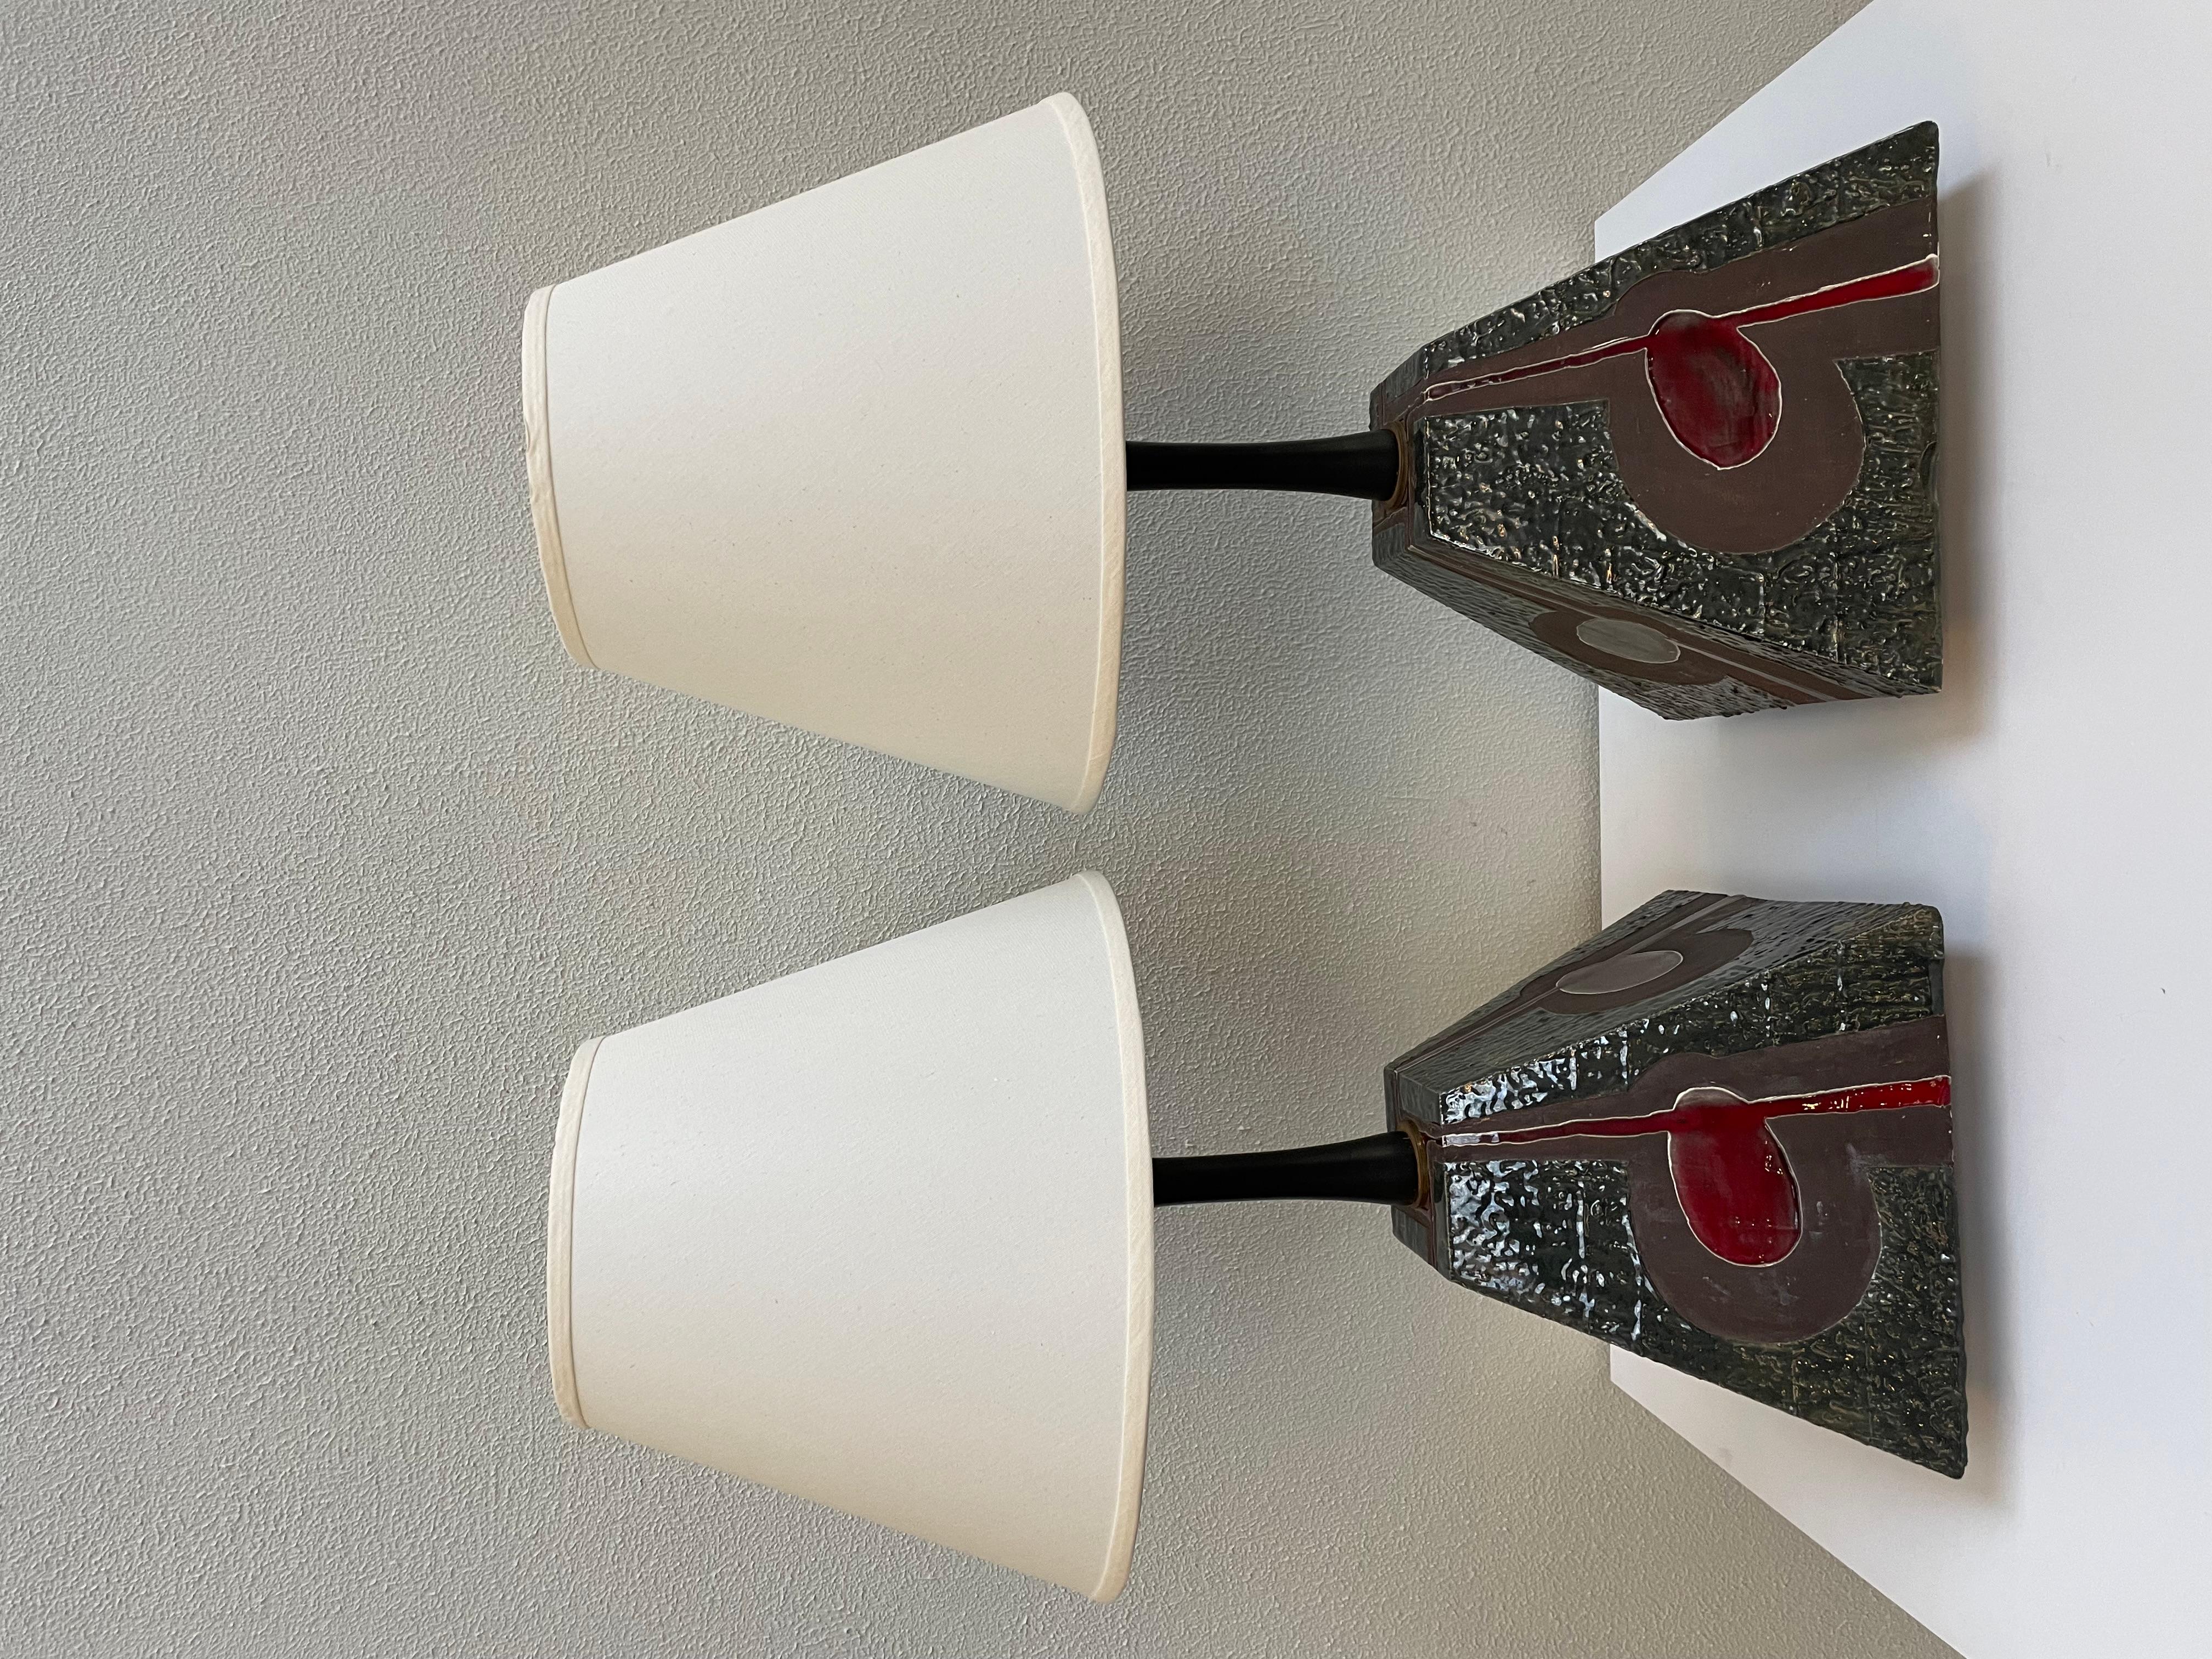 Beautifully detailed pair of MCM Ceramic Brutalist table lamps. Shade included. 

Measurements including lamp shade at 16 x 16 inches.